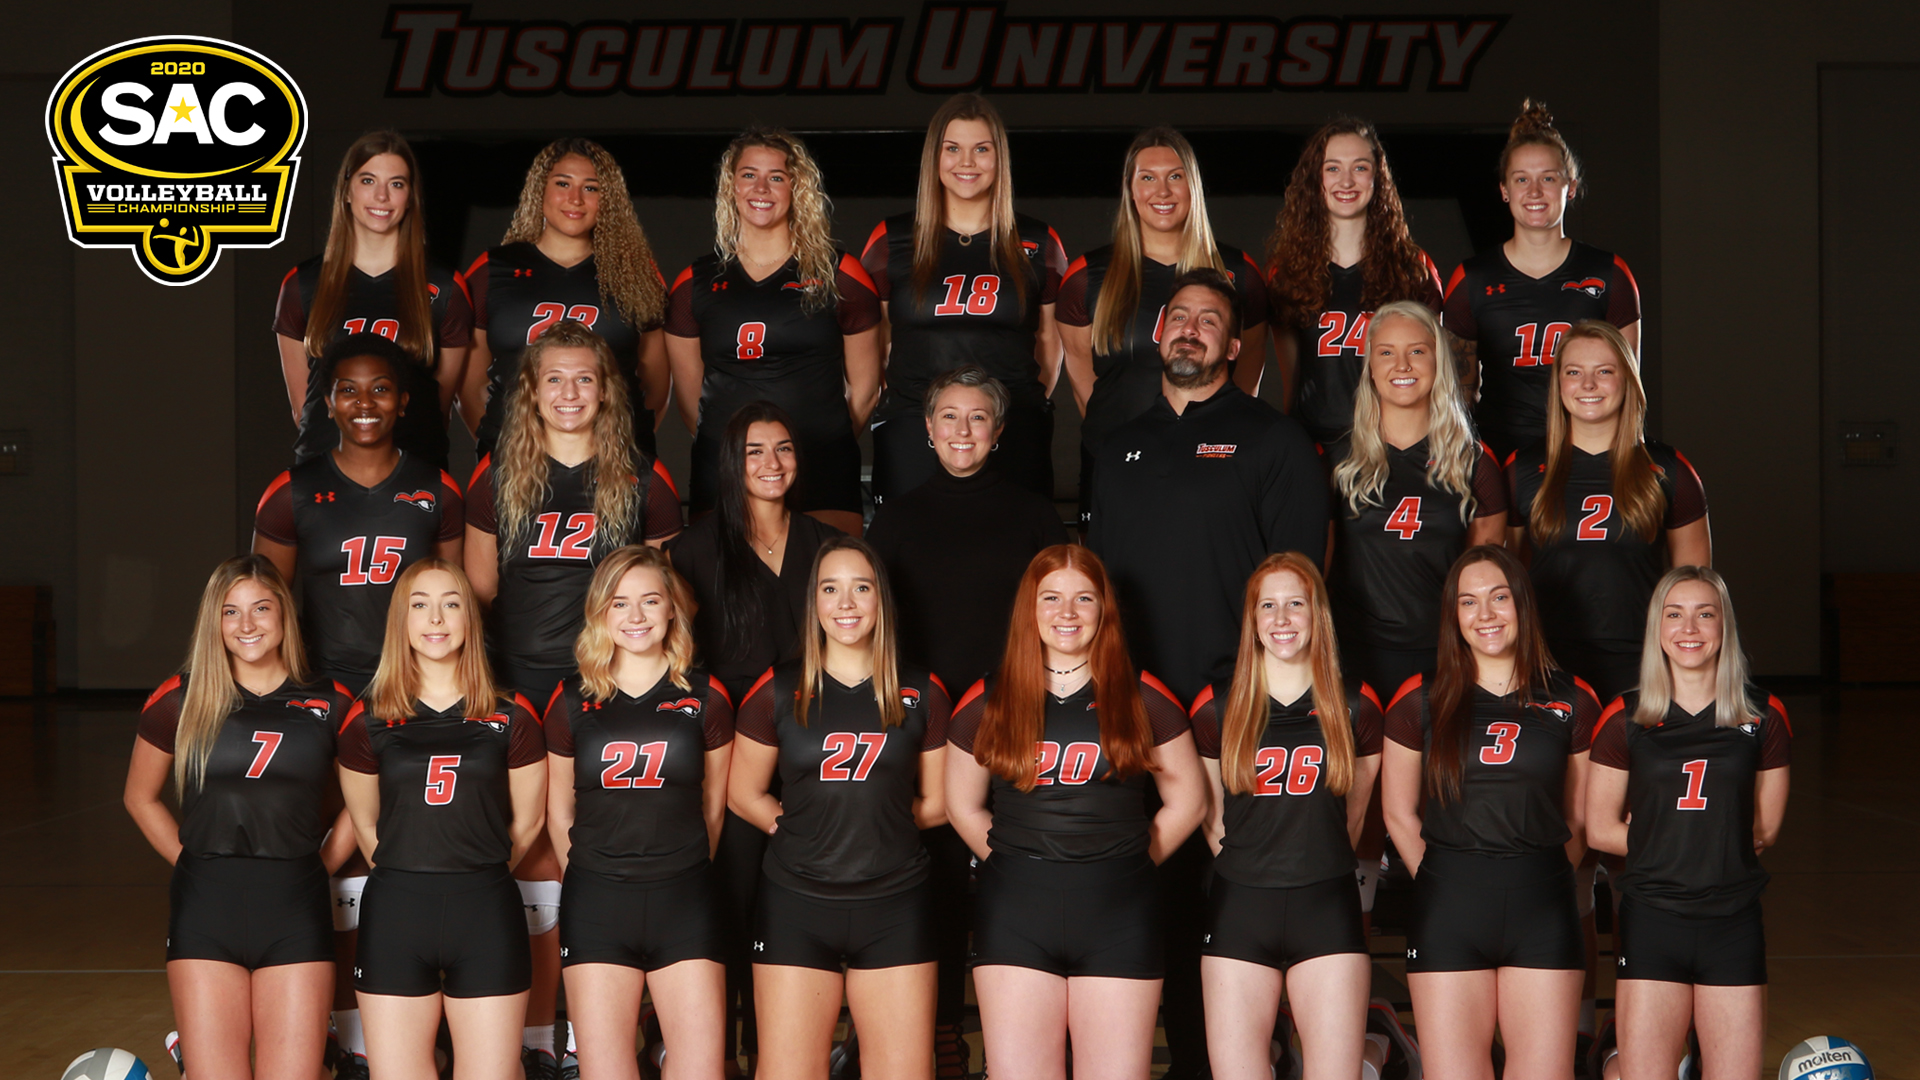 Tusculum drops contest at Queens, earns 8th seed in SAC tournament